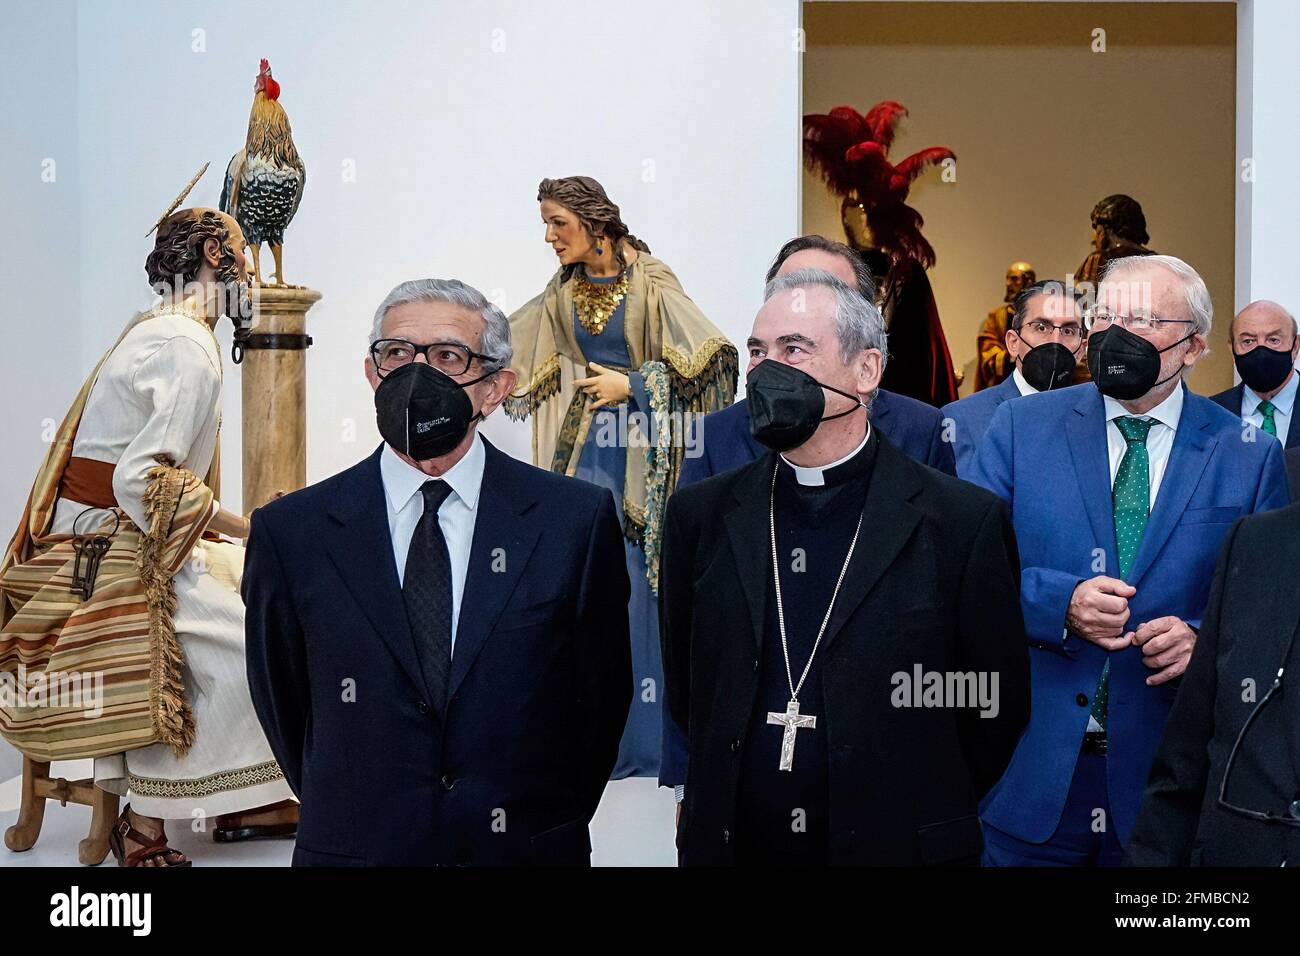 Malaga, Spain. 07th May, 2021. President of Fundacion Unicaja, Braulio Medel; Malaga Bishop, Jesus Catala Ibañez; and President of Unicaja, Manuel Azuaga seen during the exhibition at Centro Cultural Fundacion Unicaja.'Un siglo de esplendor' is an exhibition that shows the artistic heritage of the Holy Week brotherhoods of Malaga and is one of the events organized by Agrupacion de Cofradias de Semana Santa de Malaga for the centenary of the institution. (Photo by Francis Gonzalez/SOPA Images/Sipa USA) Credit: Sipa USA/Alamy Live News Stock Photo